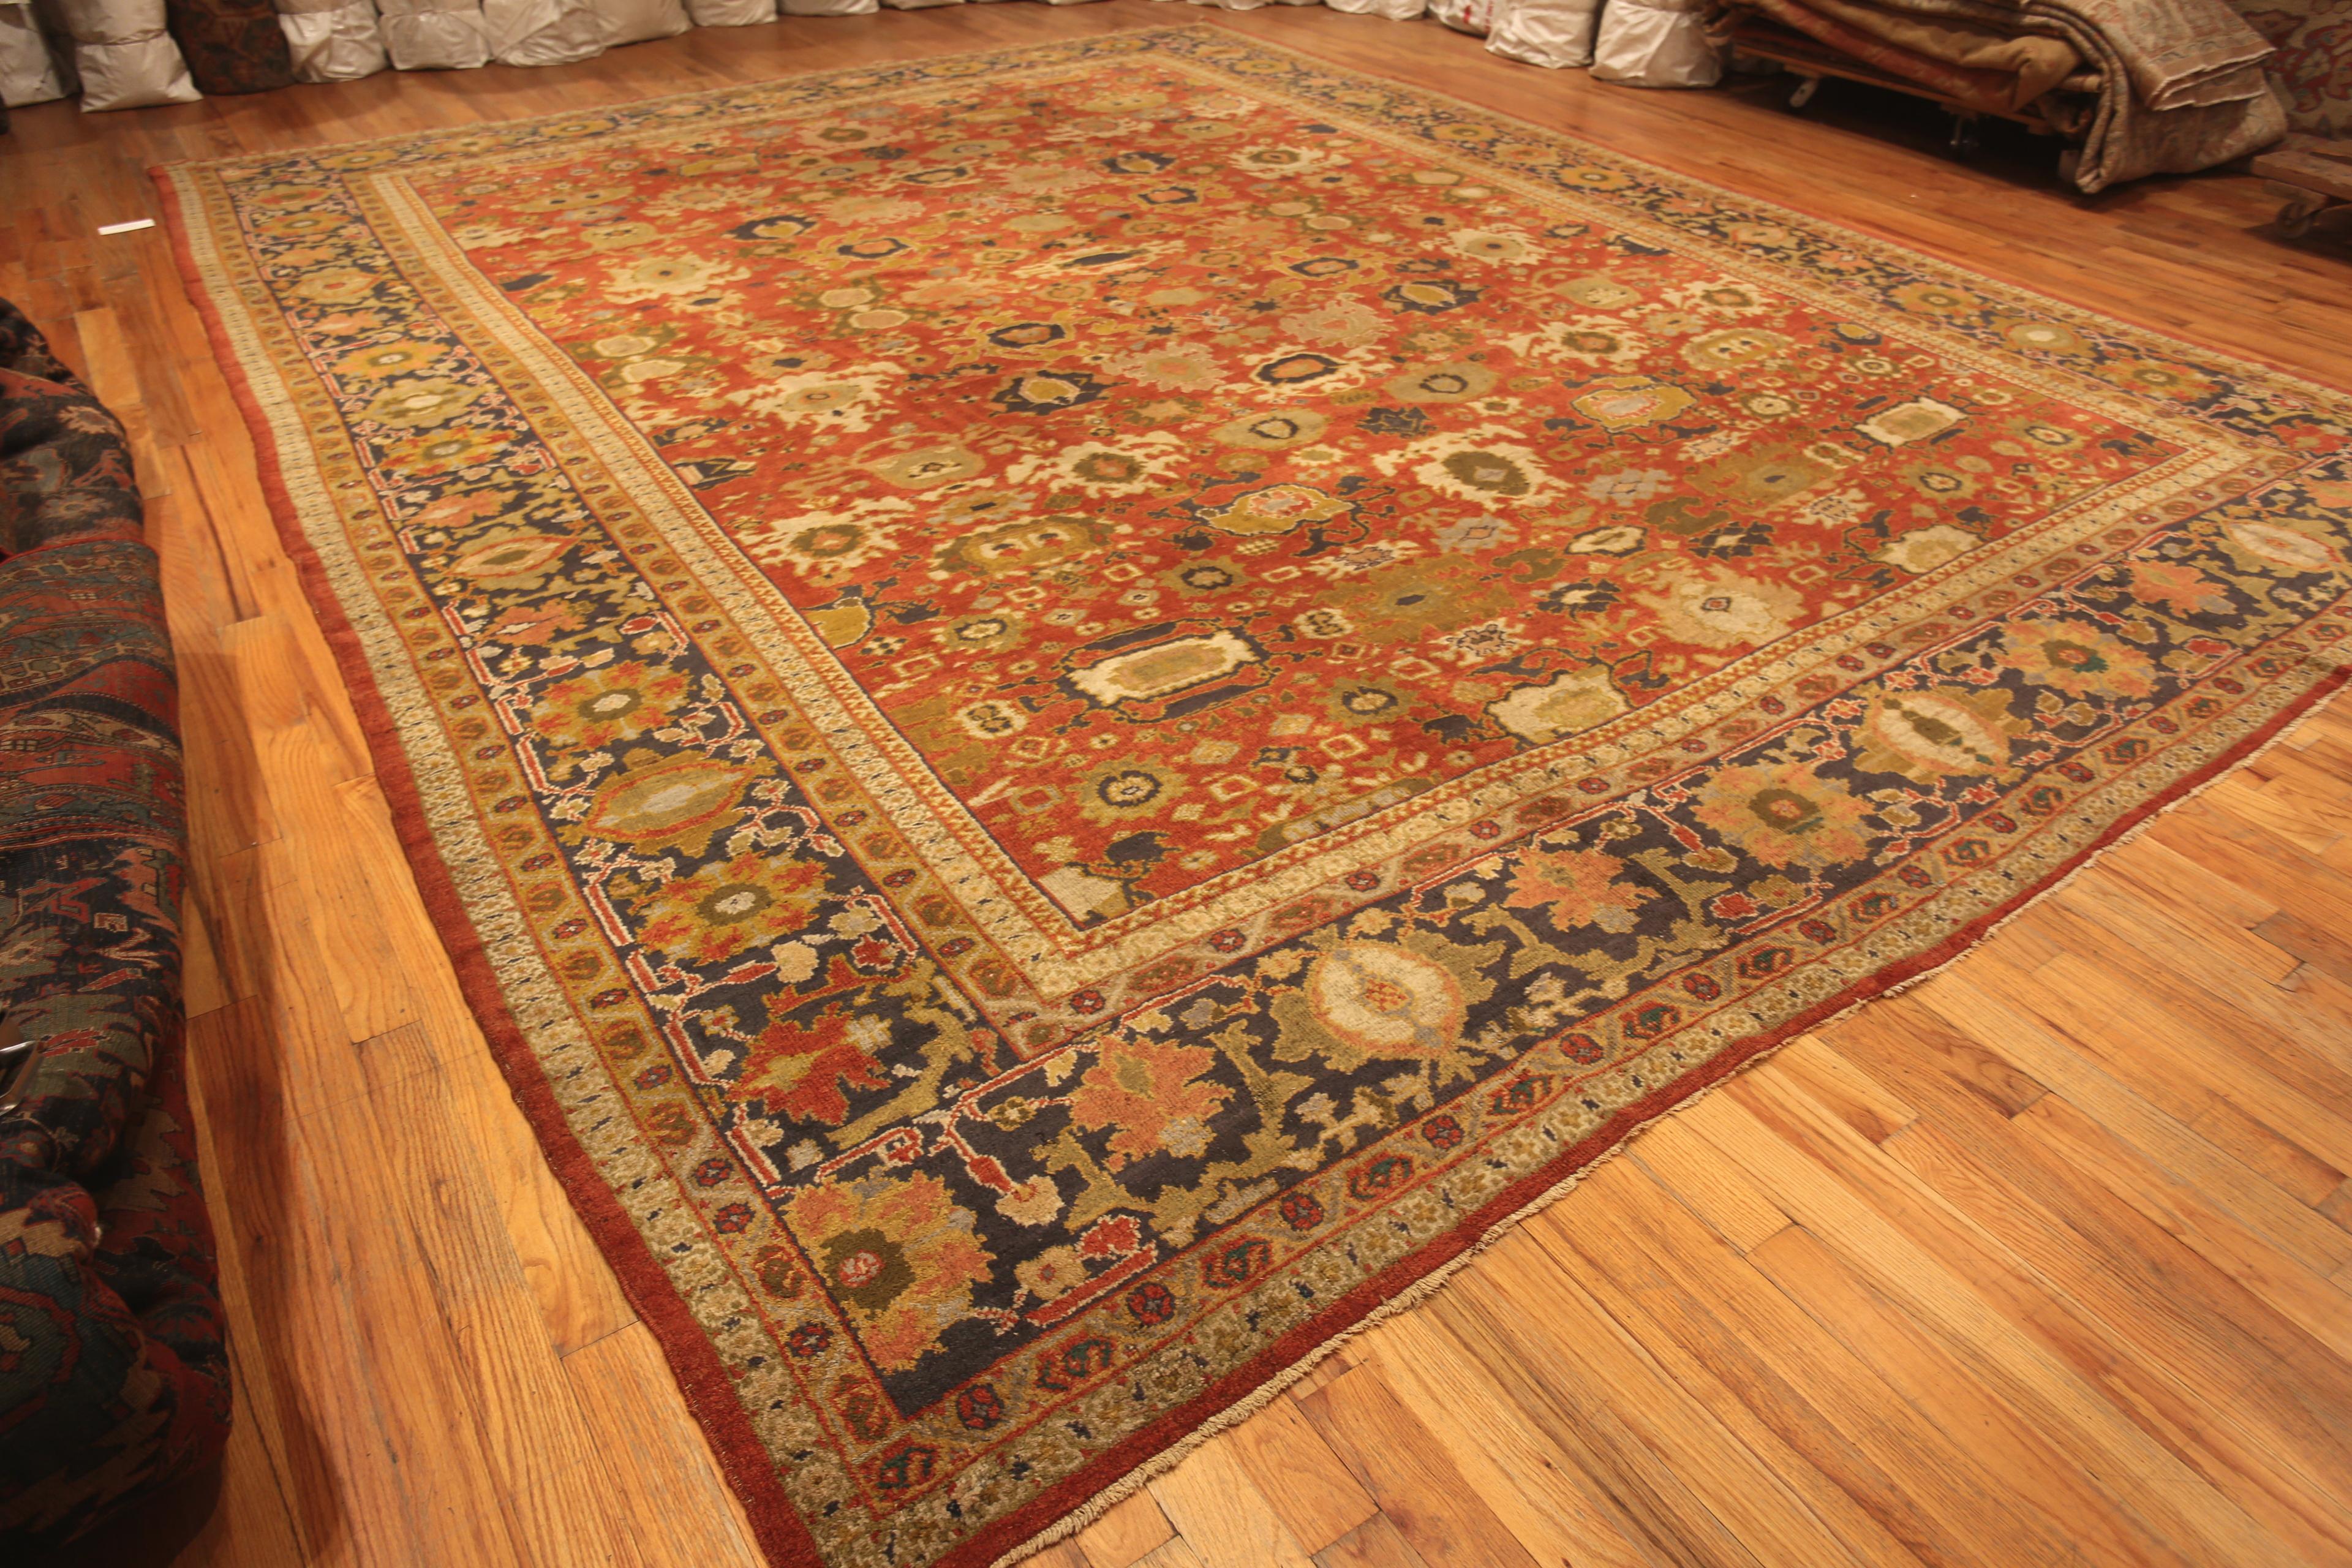 Large Antique Persian Sultanabad Area Rug, Country of Origin: Persian rugs, Circa date: 1880. Size: 13 ft 5 in x 17 ft 2 in (4.09 m x 5.23 m)